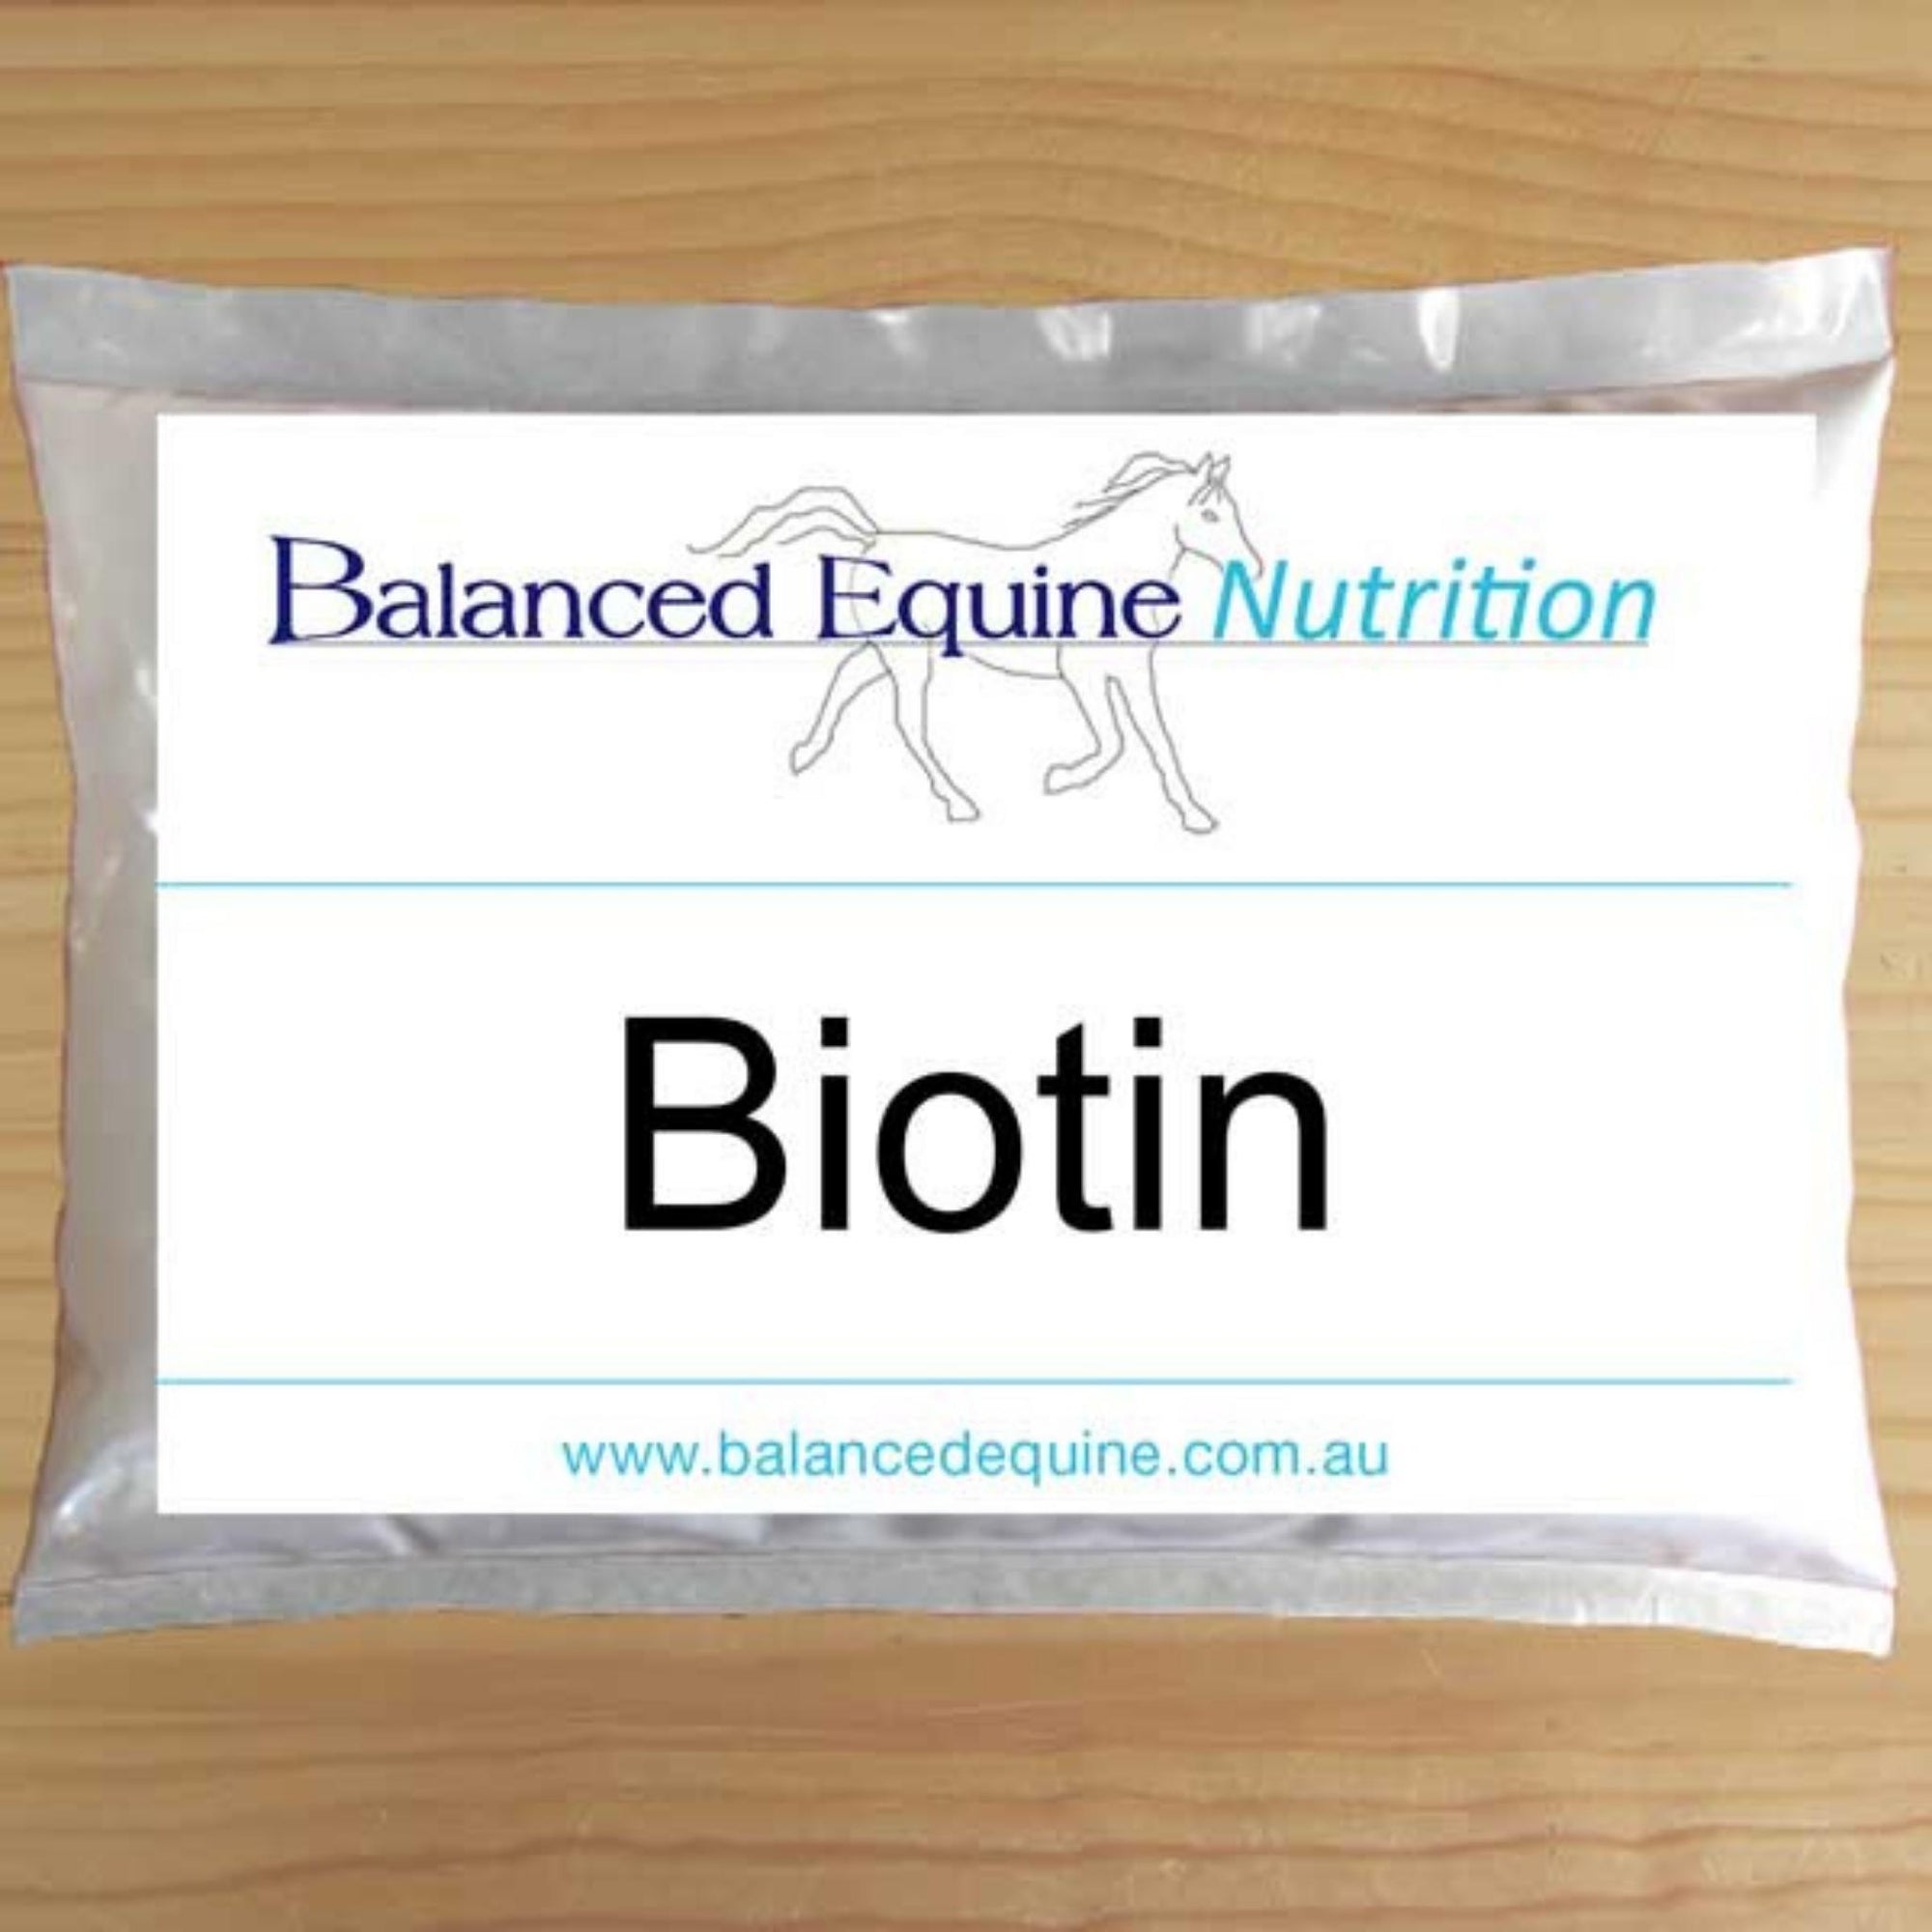 Packet of Biotin, with label stating "Balanced Equine Nutrition - Biotin".